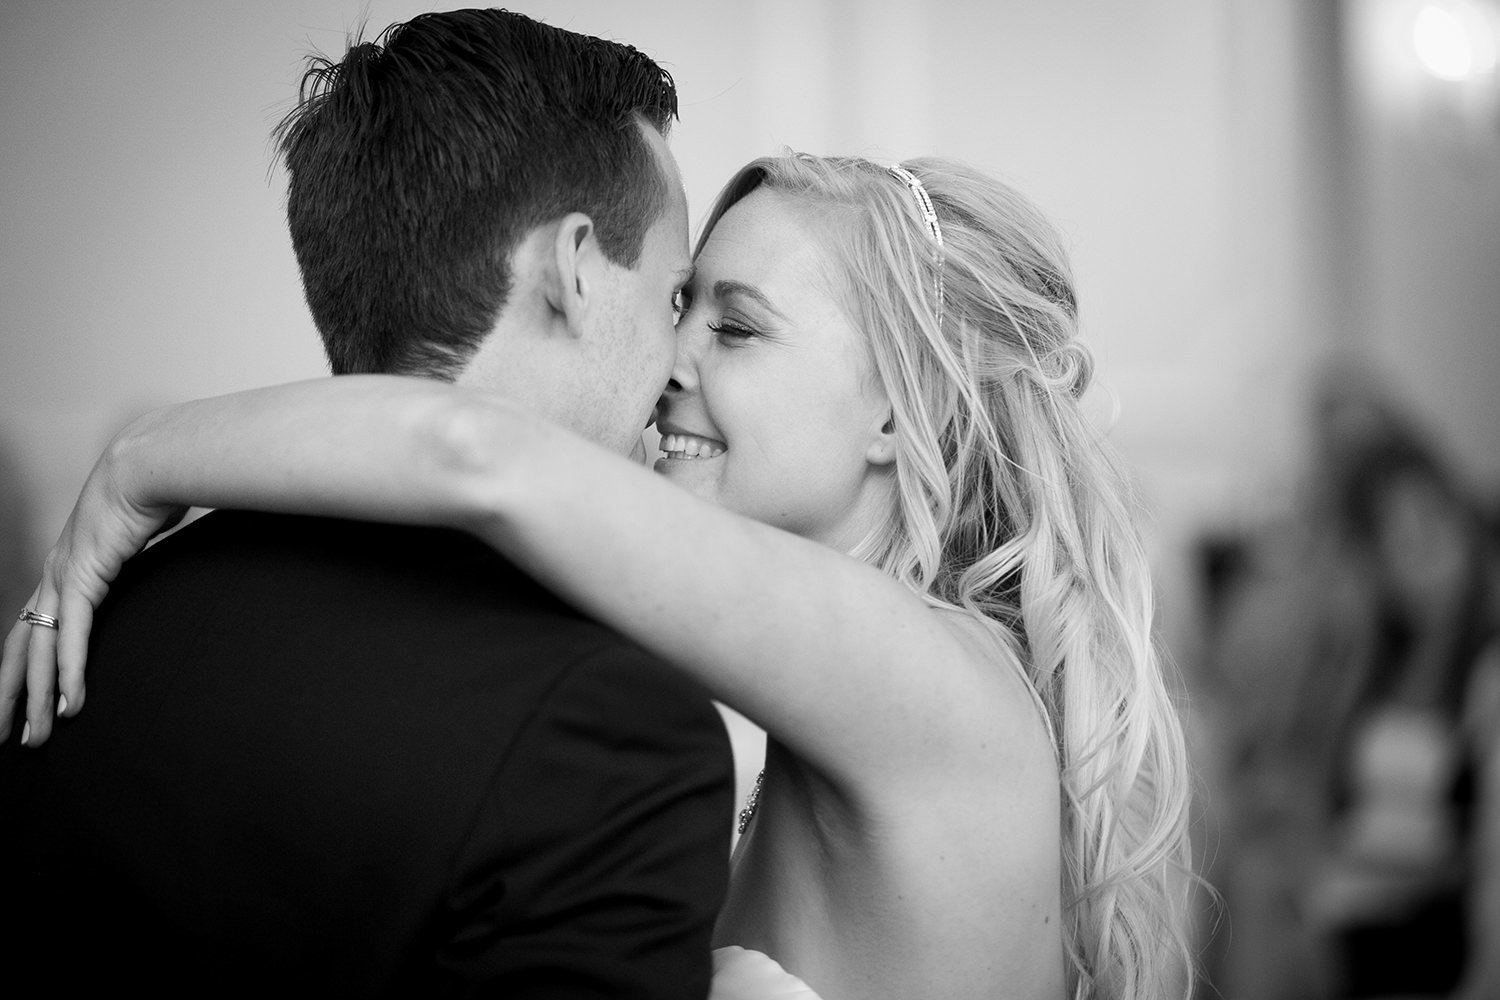 Sweet natural moment between the bride and her man